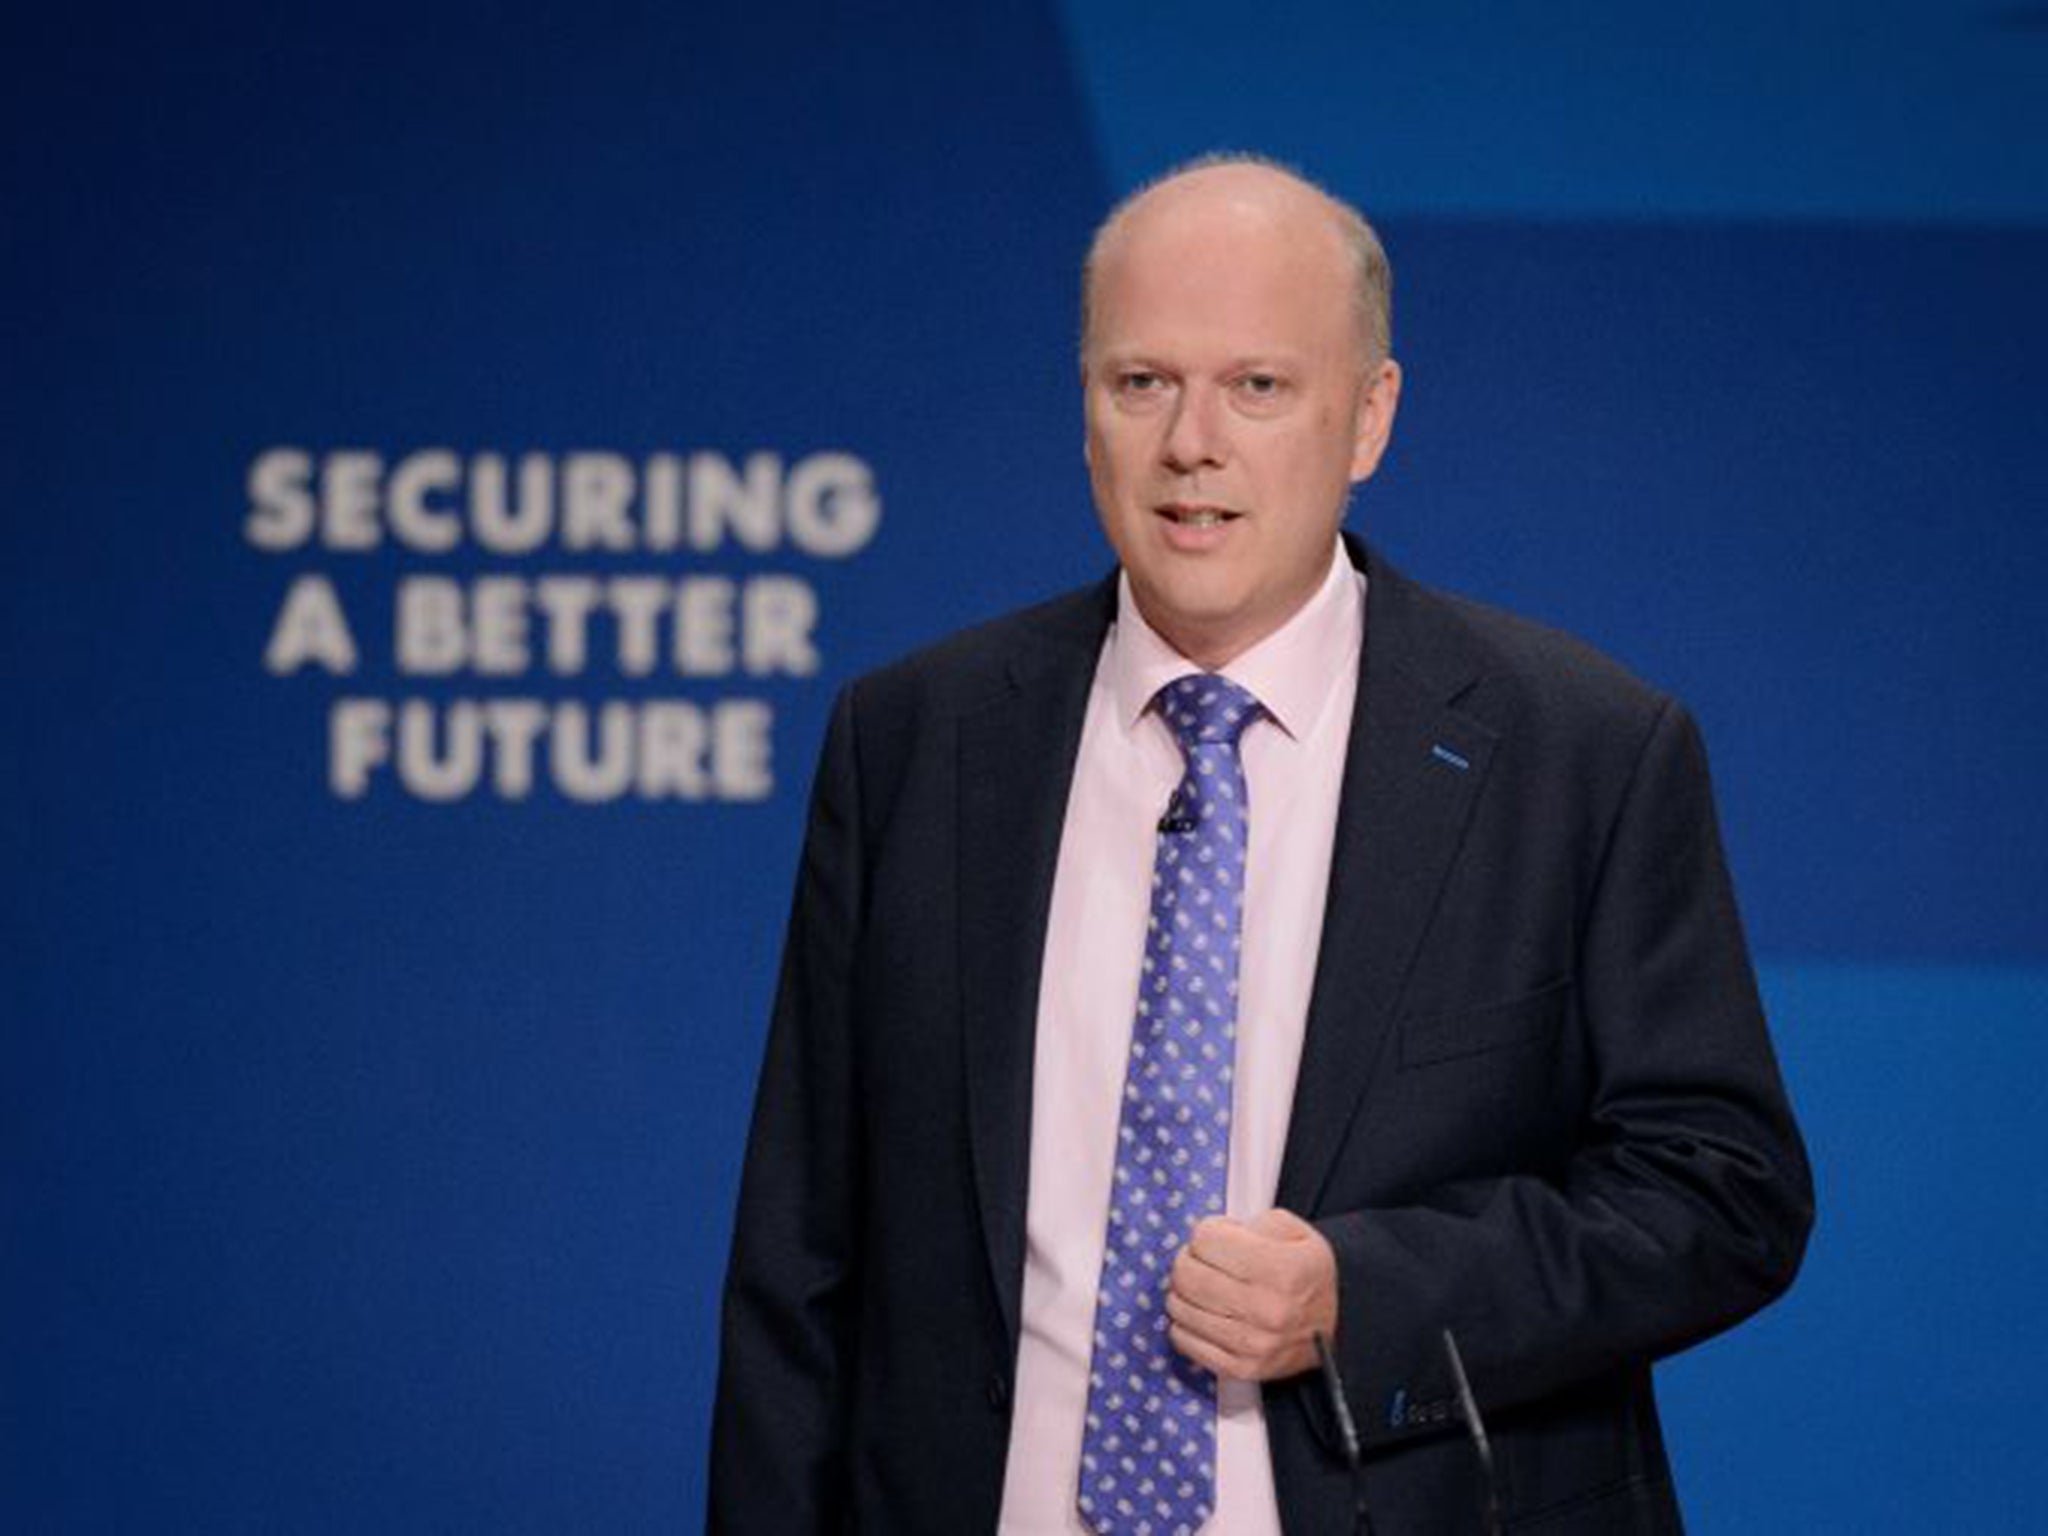 Grayling was told he issued 'inaccurate' guidance on rights to legal aid at inquests